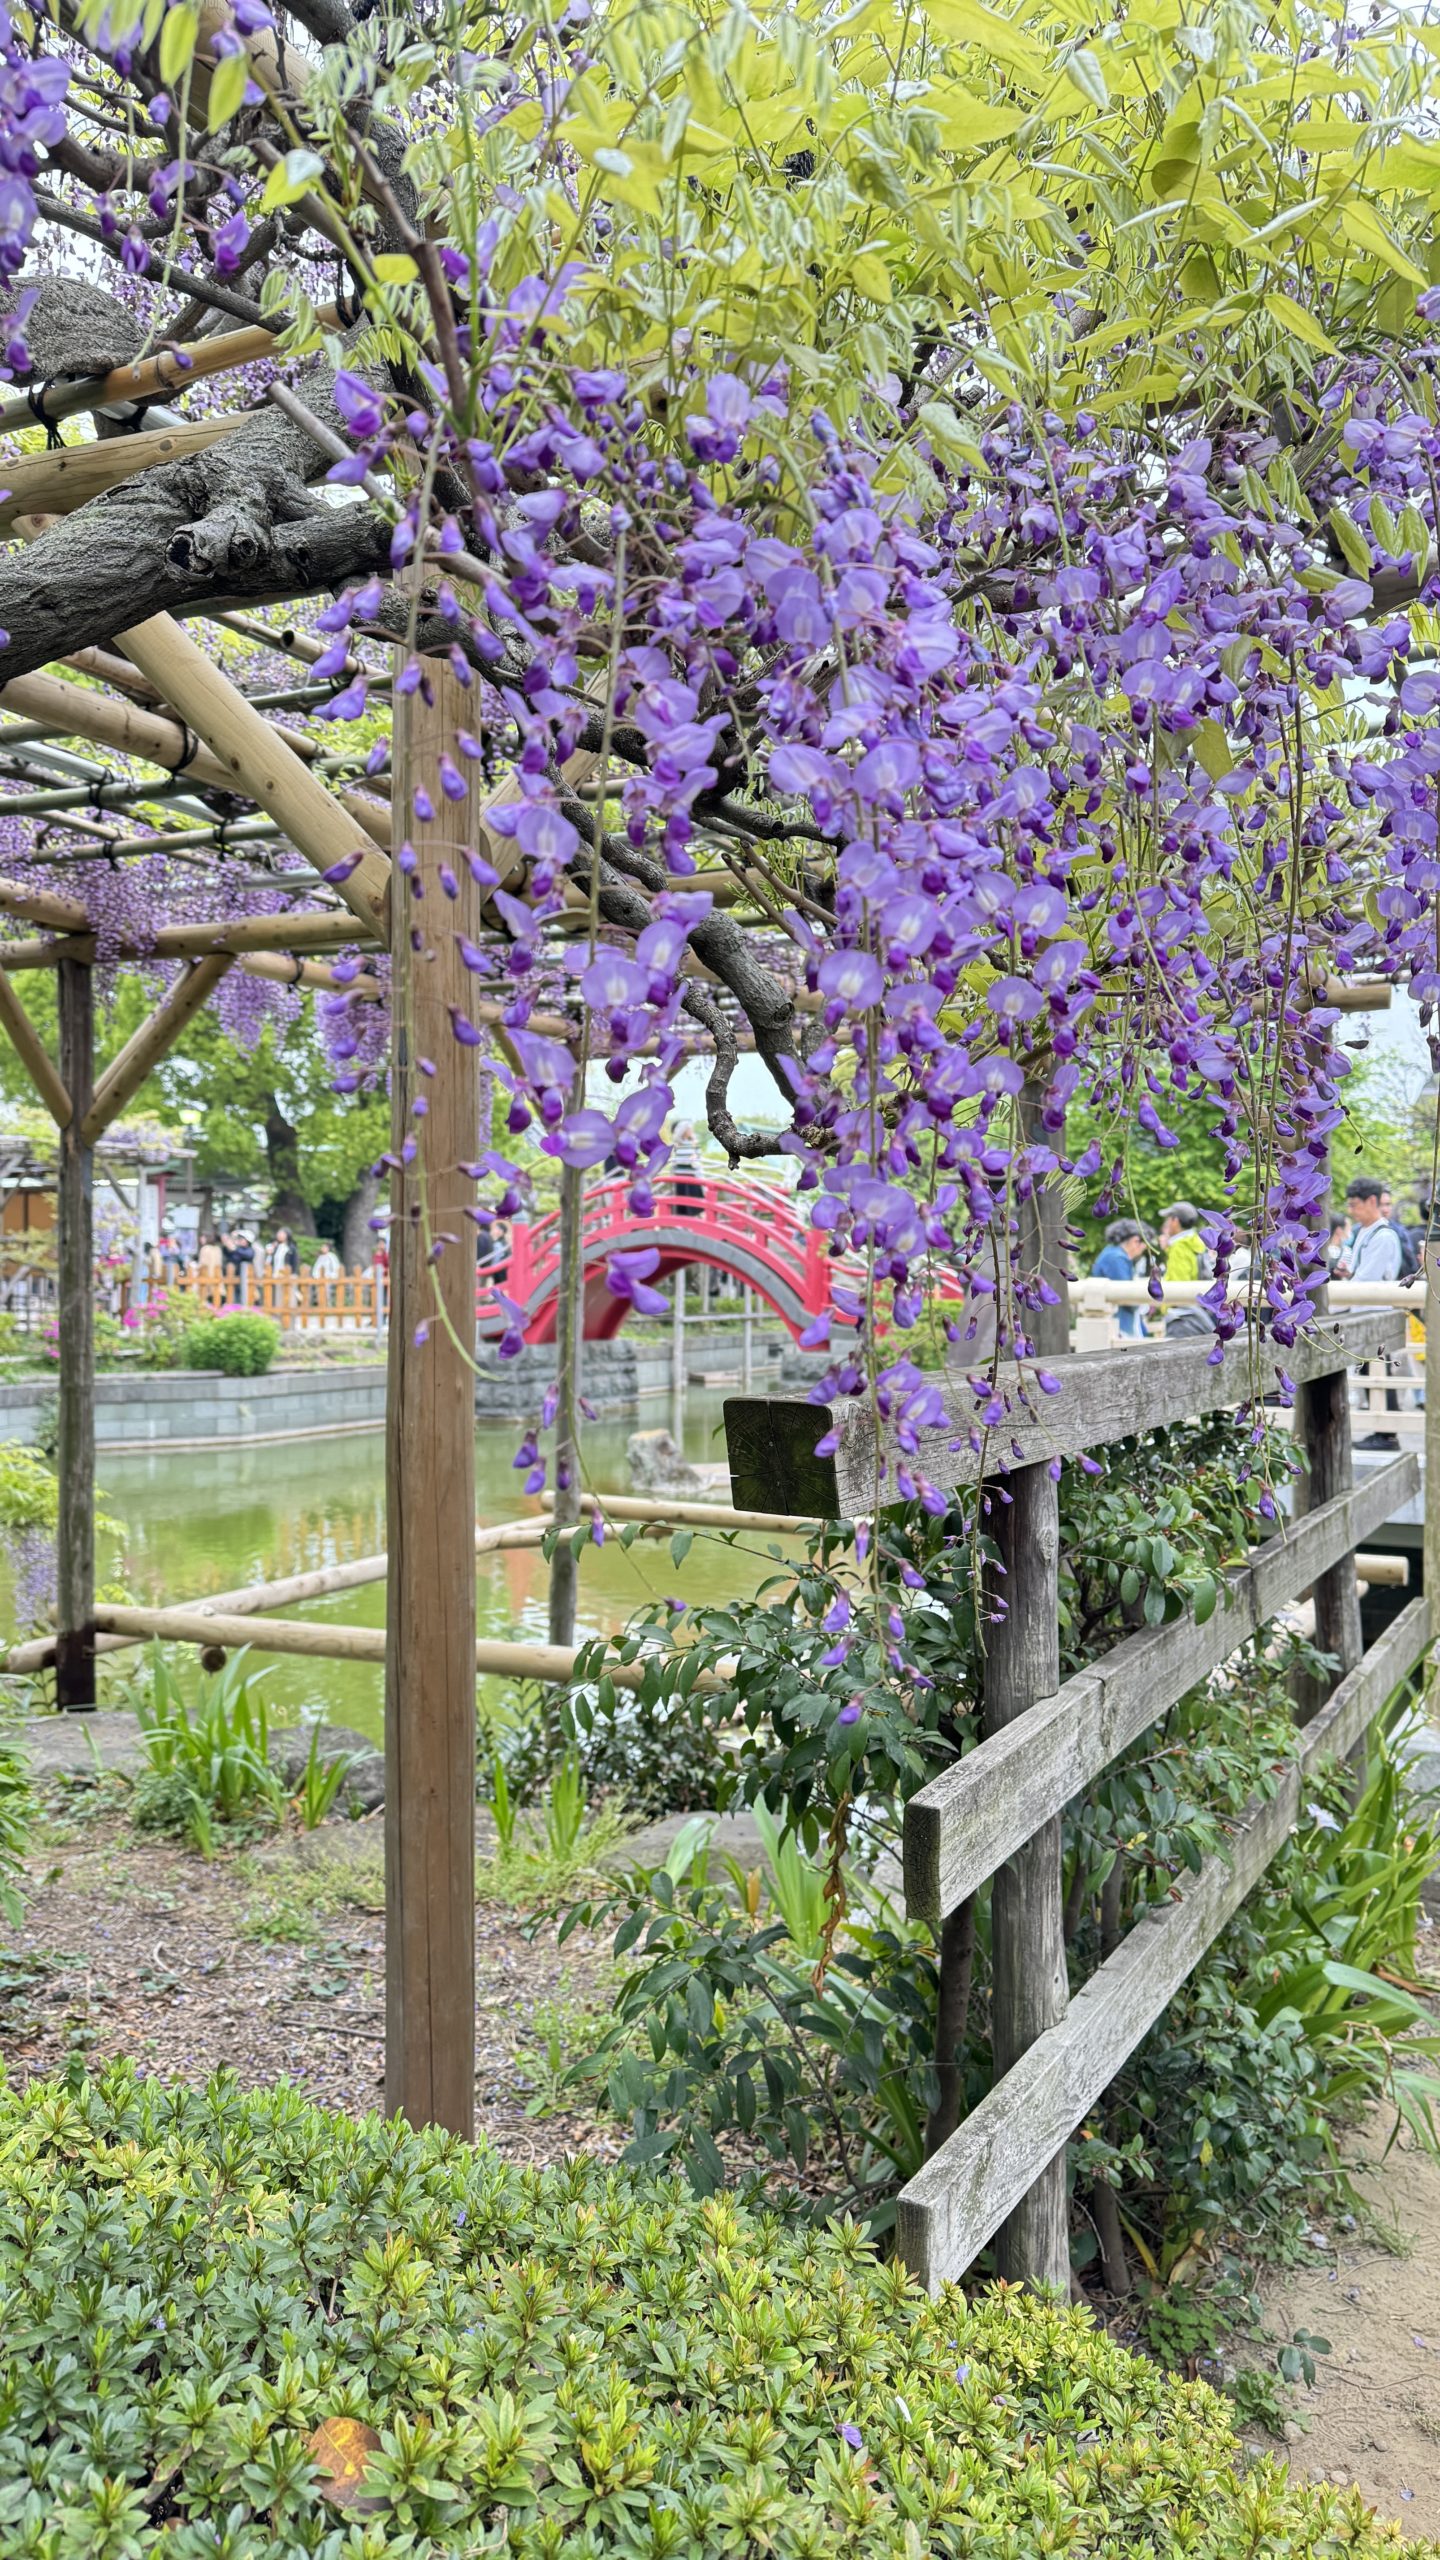 Kameido Shrine with Wisteria, and “Too Low A Mistress” [Shakespeare For You]